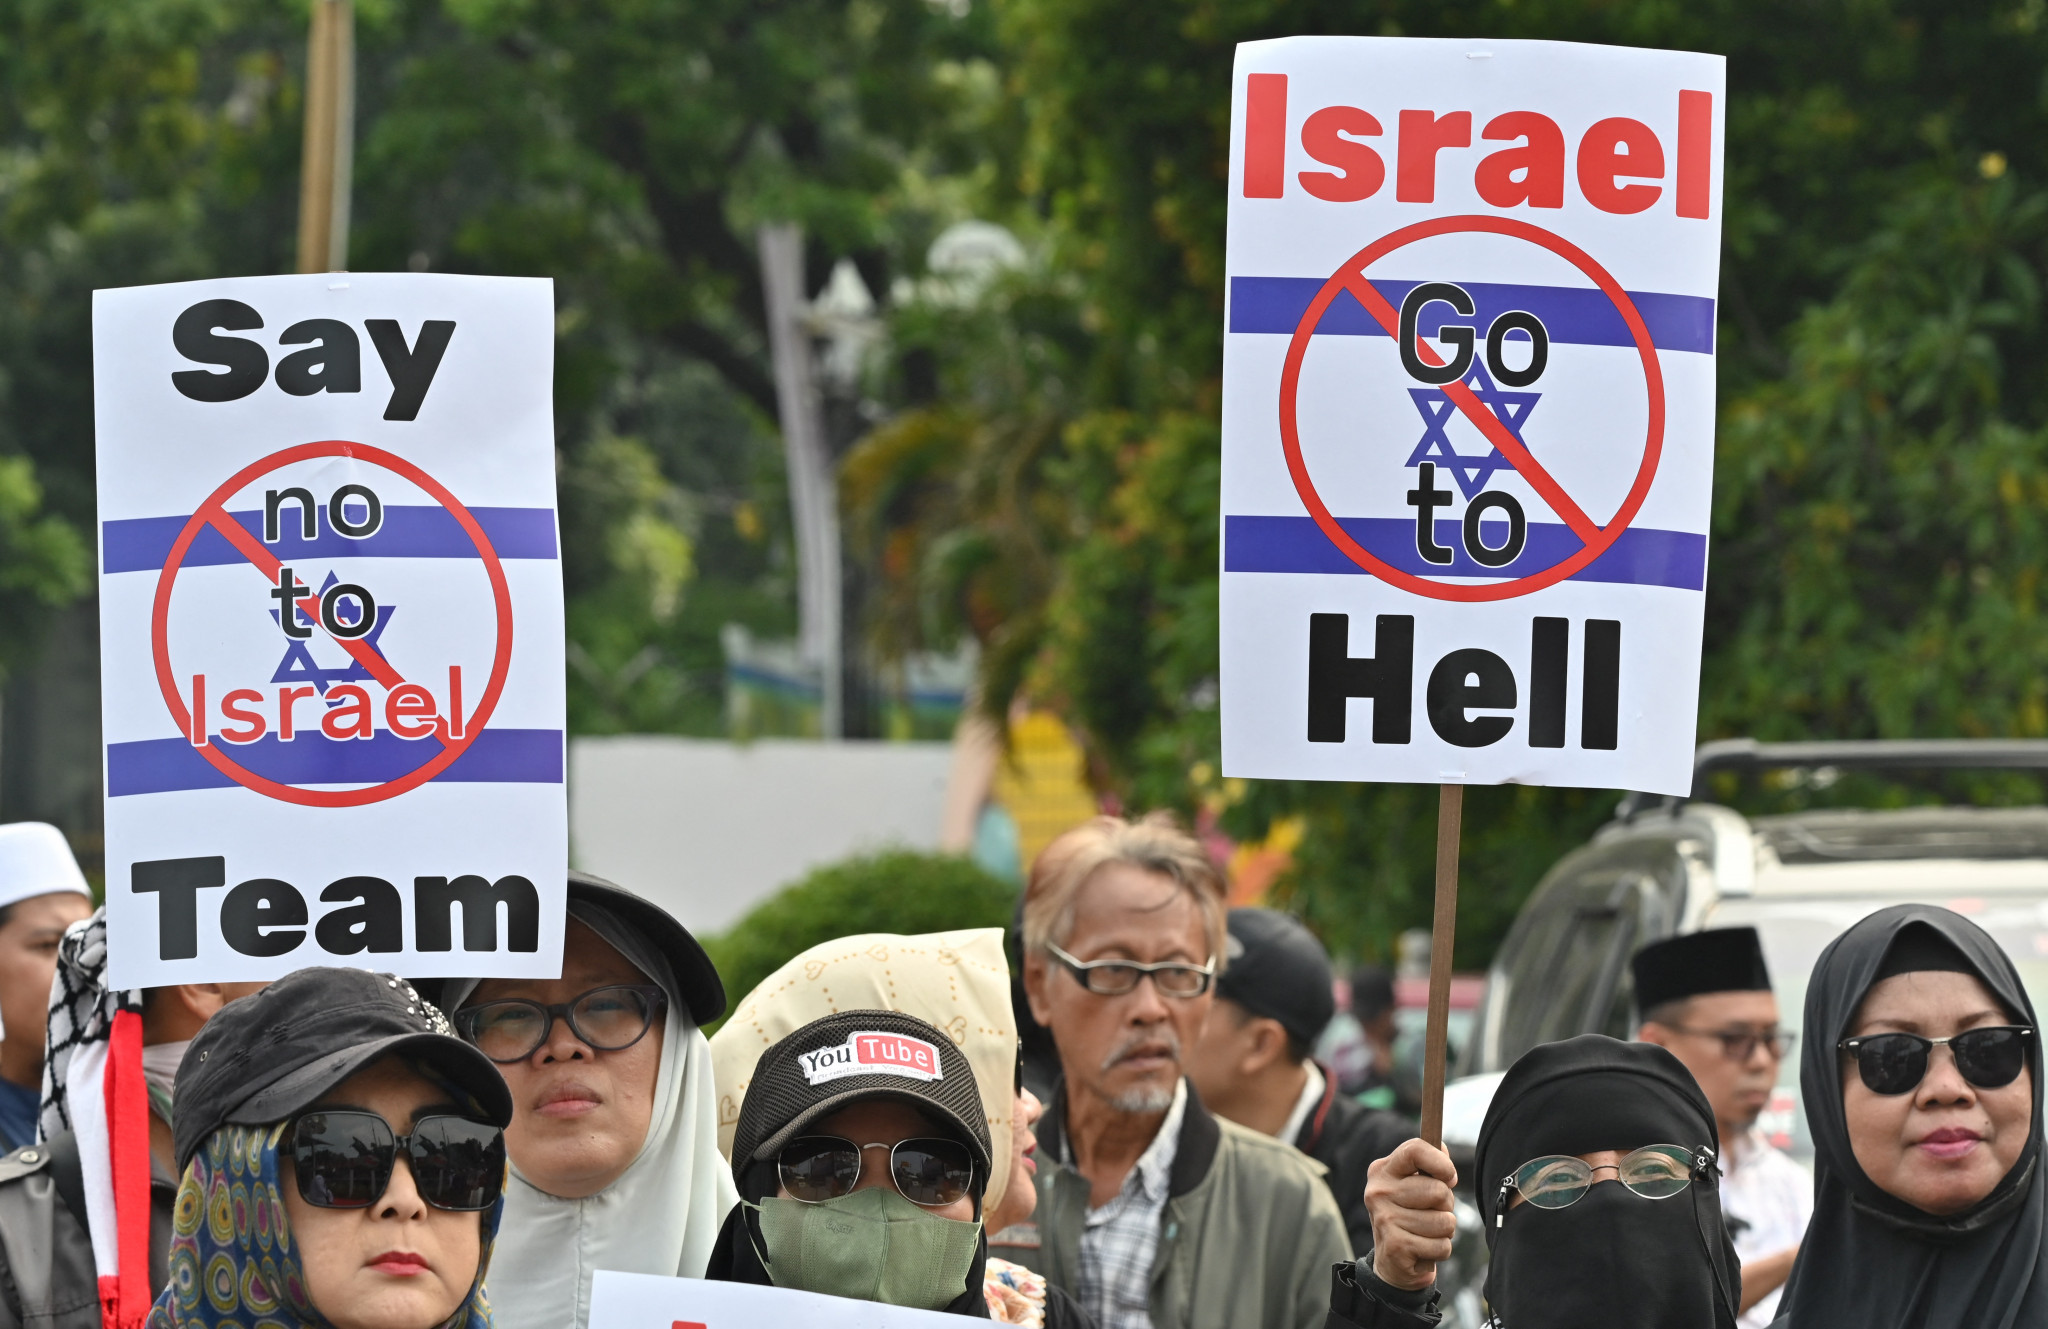 Protests took place in Jakarta against Israel's participation in the Under-20 World Cup, which was subsequently stripped from Indonesia ©Getty Images